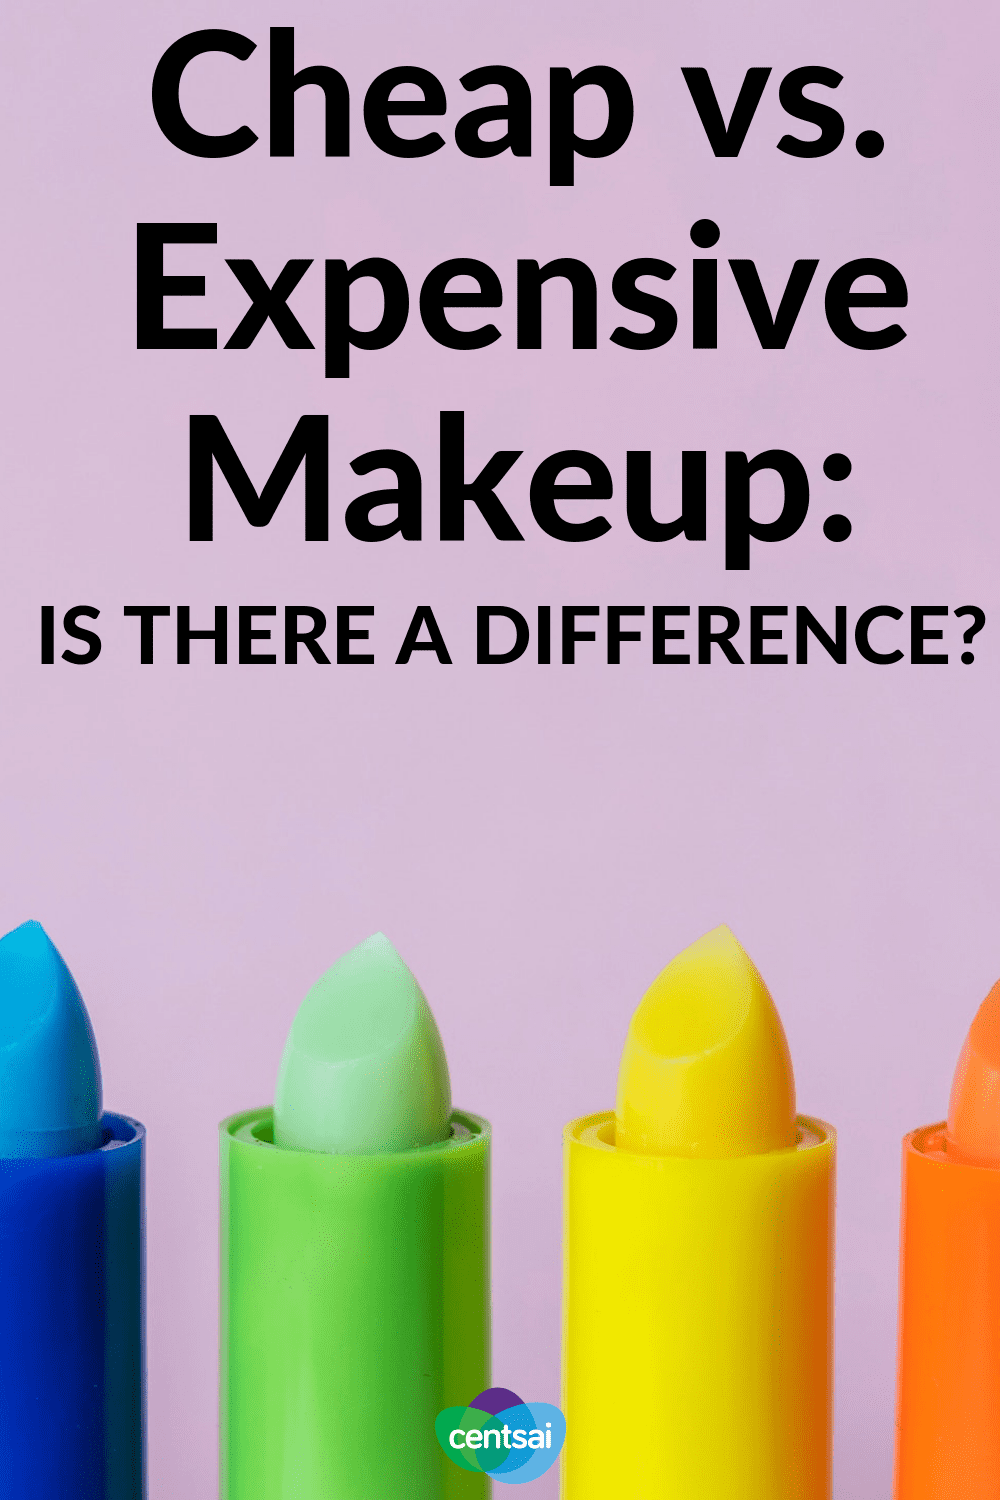 Cheap vs. Expensive Makeup: Is There A Difference? Is high-end makeup really better than the stuff you buy at a drugstore? Check out this comparison of cheap vs. expensive makeup to find out. #makeup #frugal